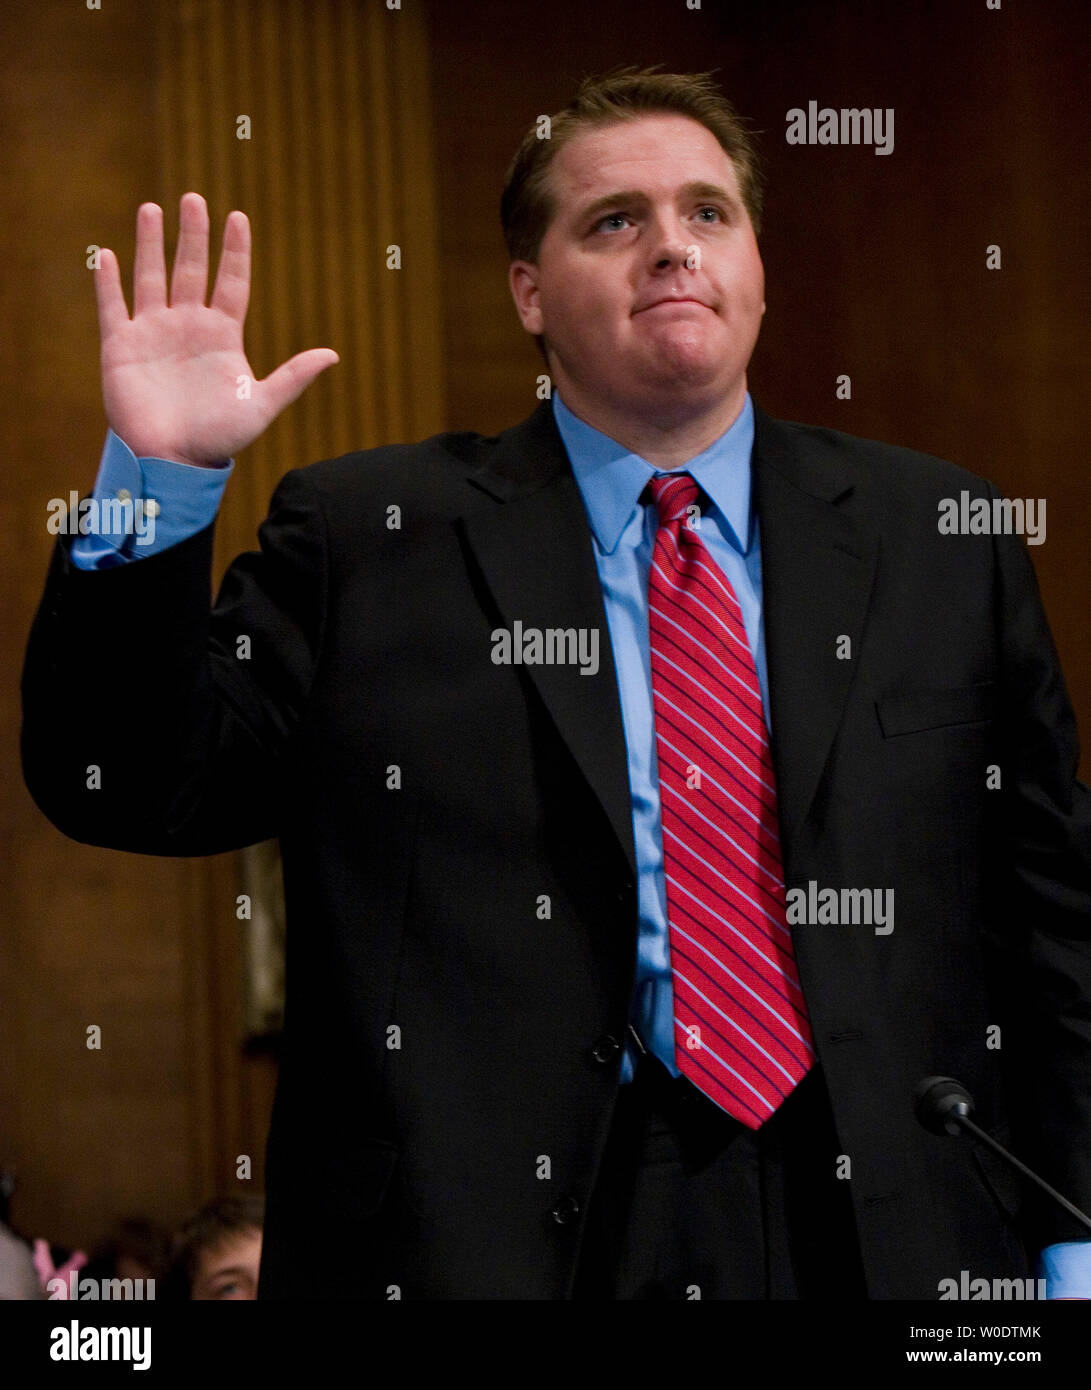 White House Deputy Political Director Scott Jennings is sworn in prior to testifying about the firings of U.S. attorneys before the Senate Judiciary Committee on Capitol Hill in Washington on August 2, 2007.      (UPI Photo/David Brody) Stock Photo